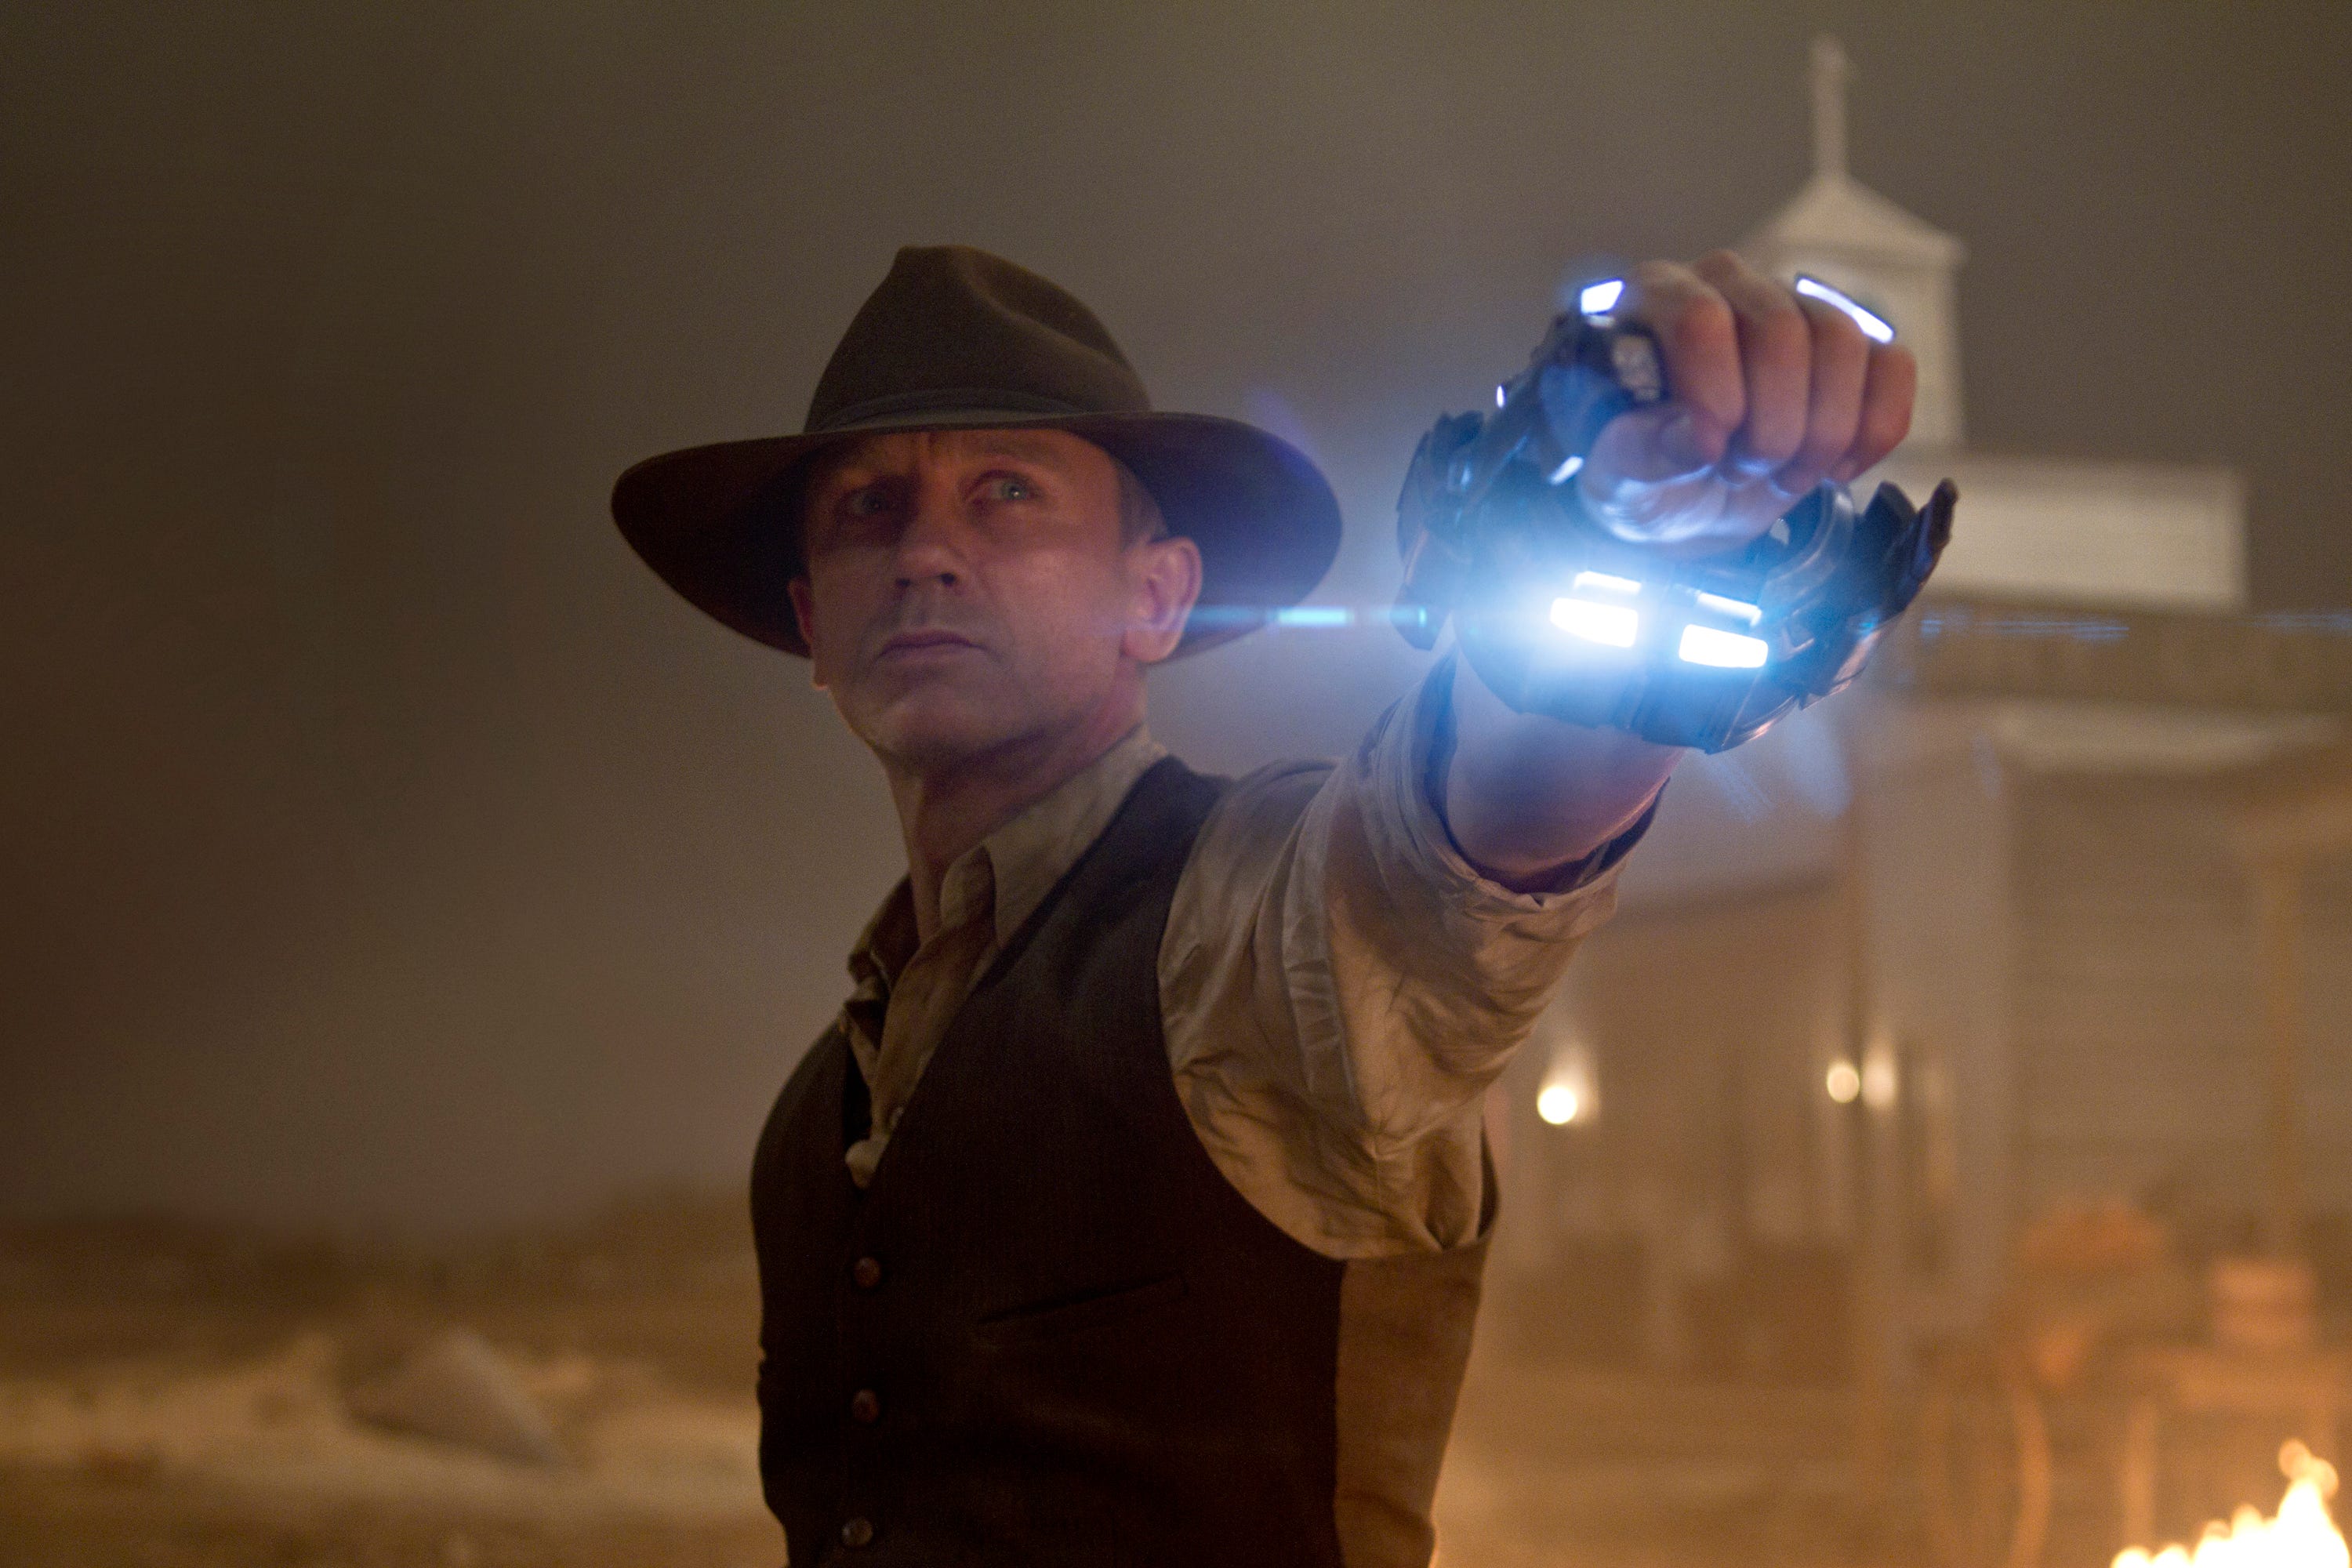 MOVIE REVIEW: 'Cowboys & Aliens' can't survive jumbled genres